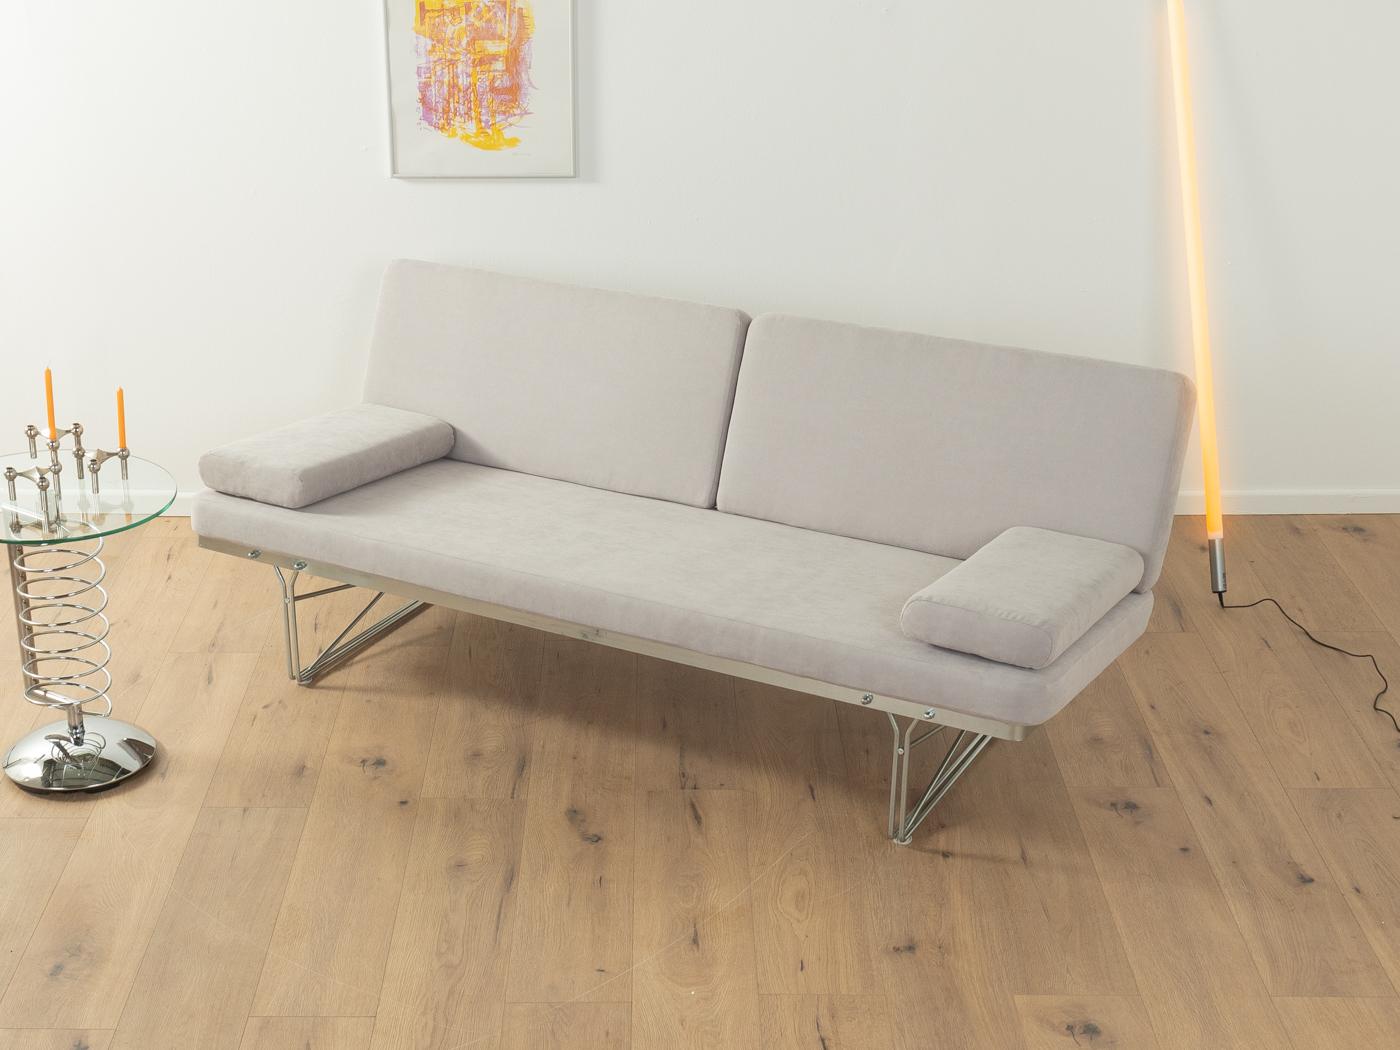 MOMENT Sofa by Niels Gammelgaard for Ikea from the 1980s with a galvanized steel frame. The sofa has been reupholstered and covered with a high-quality fabric in light grey.
Quality Features:

    very good workmanship
    high-quality materials
   